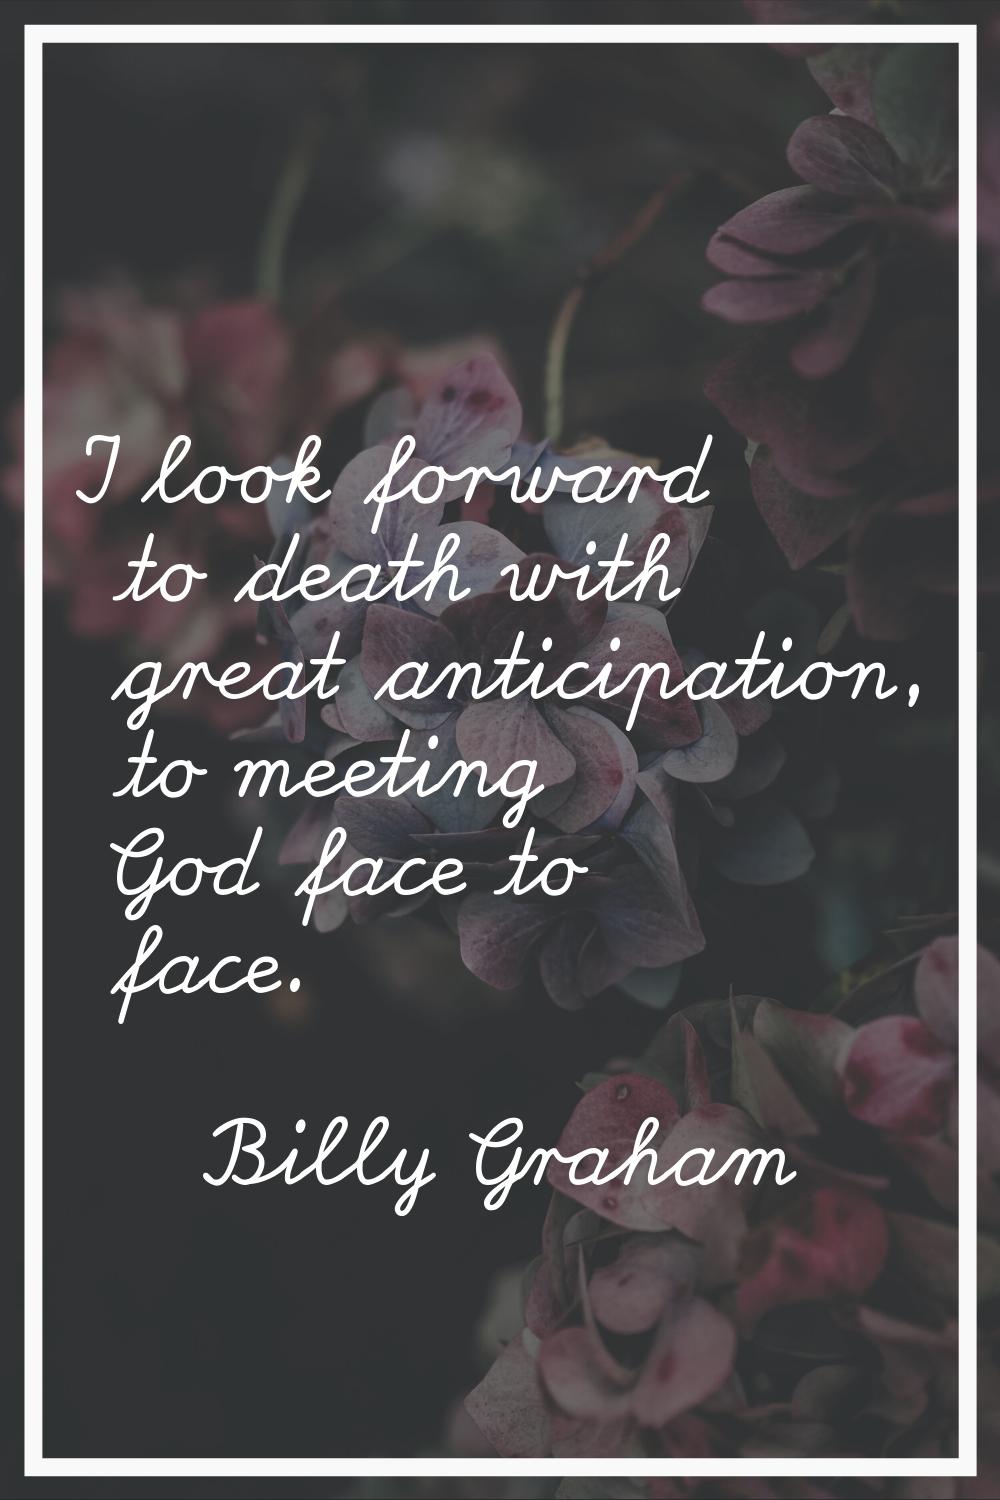 I look forward to death with great anticipation, to meeting God face to face.